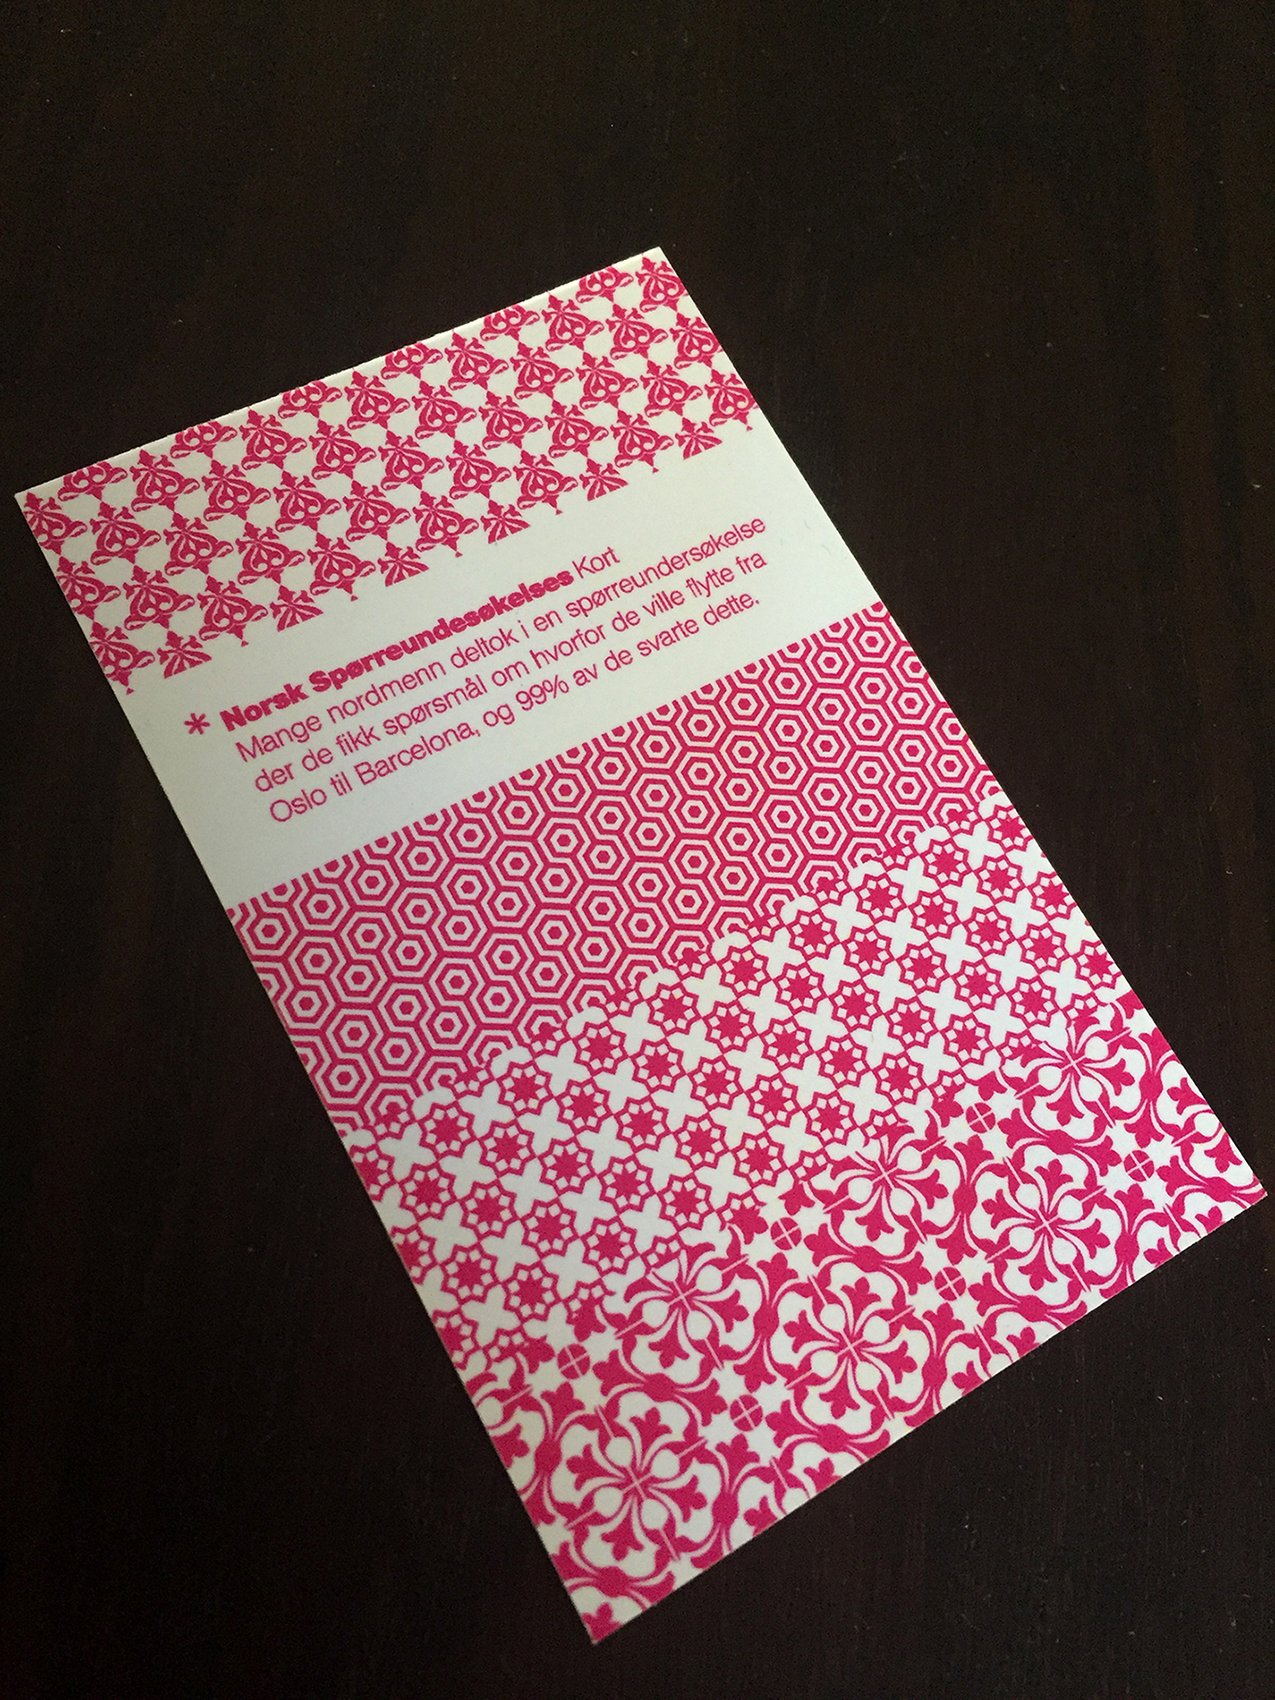 Back of the cards with the specific percentage for each reason